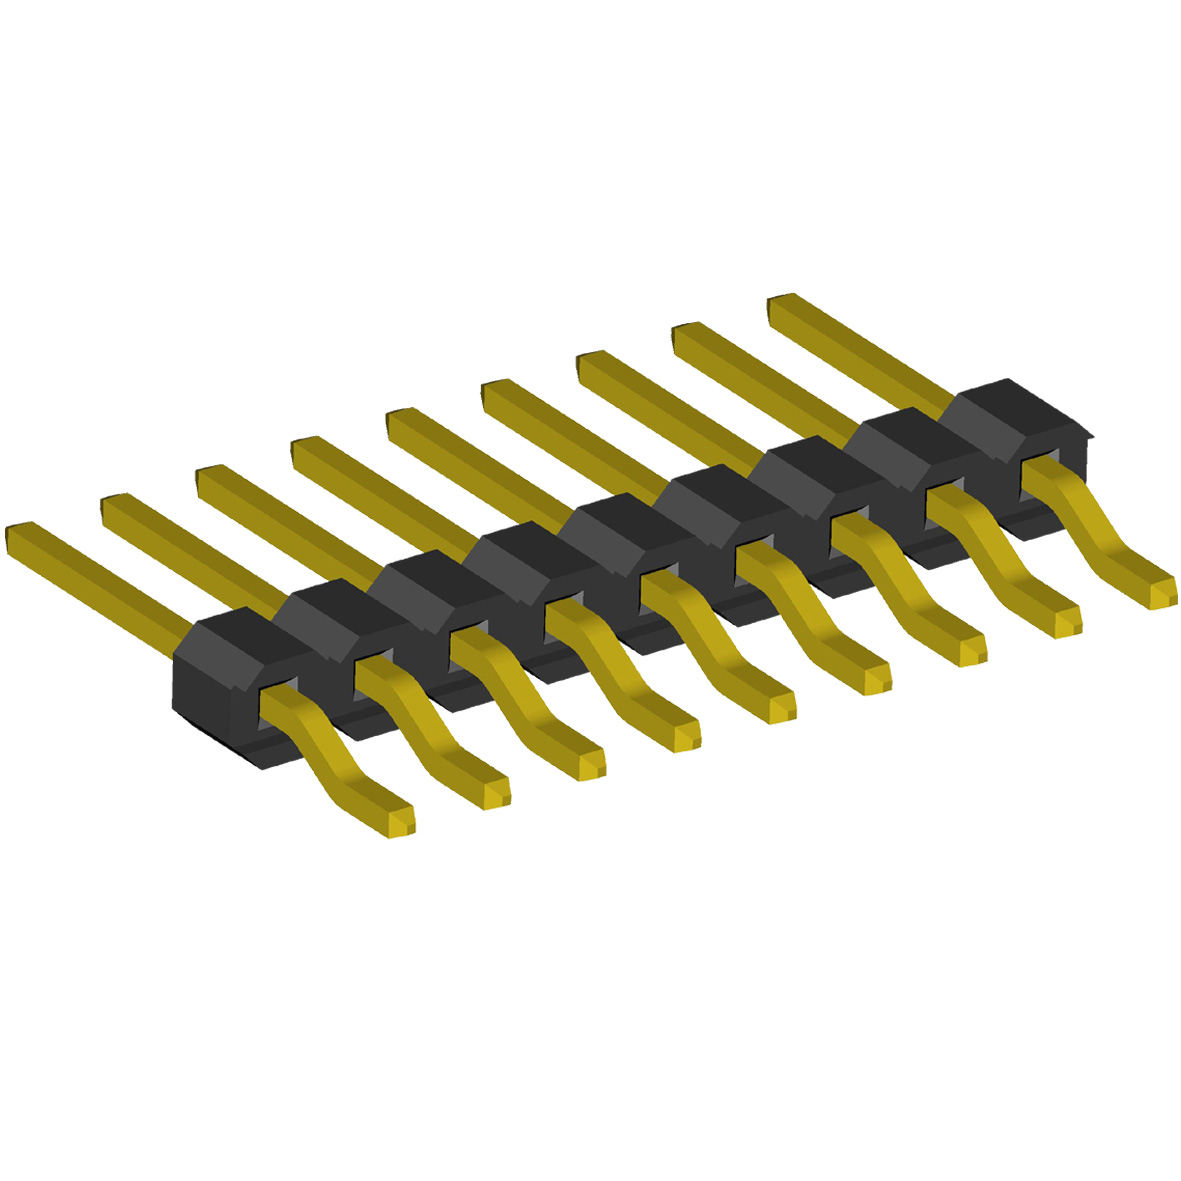 BL1225-11xxZ series, single row SMD angled pin headers, type 2, pitch 2,54 mm, 1x40 pins